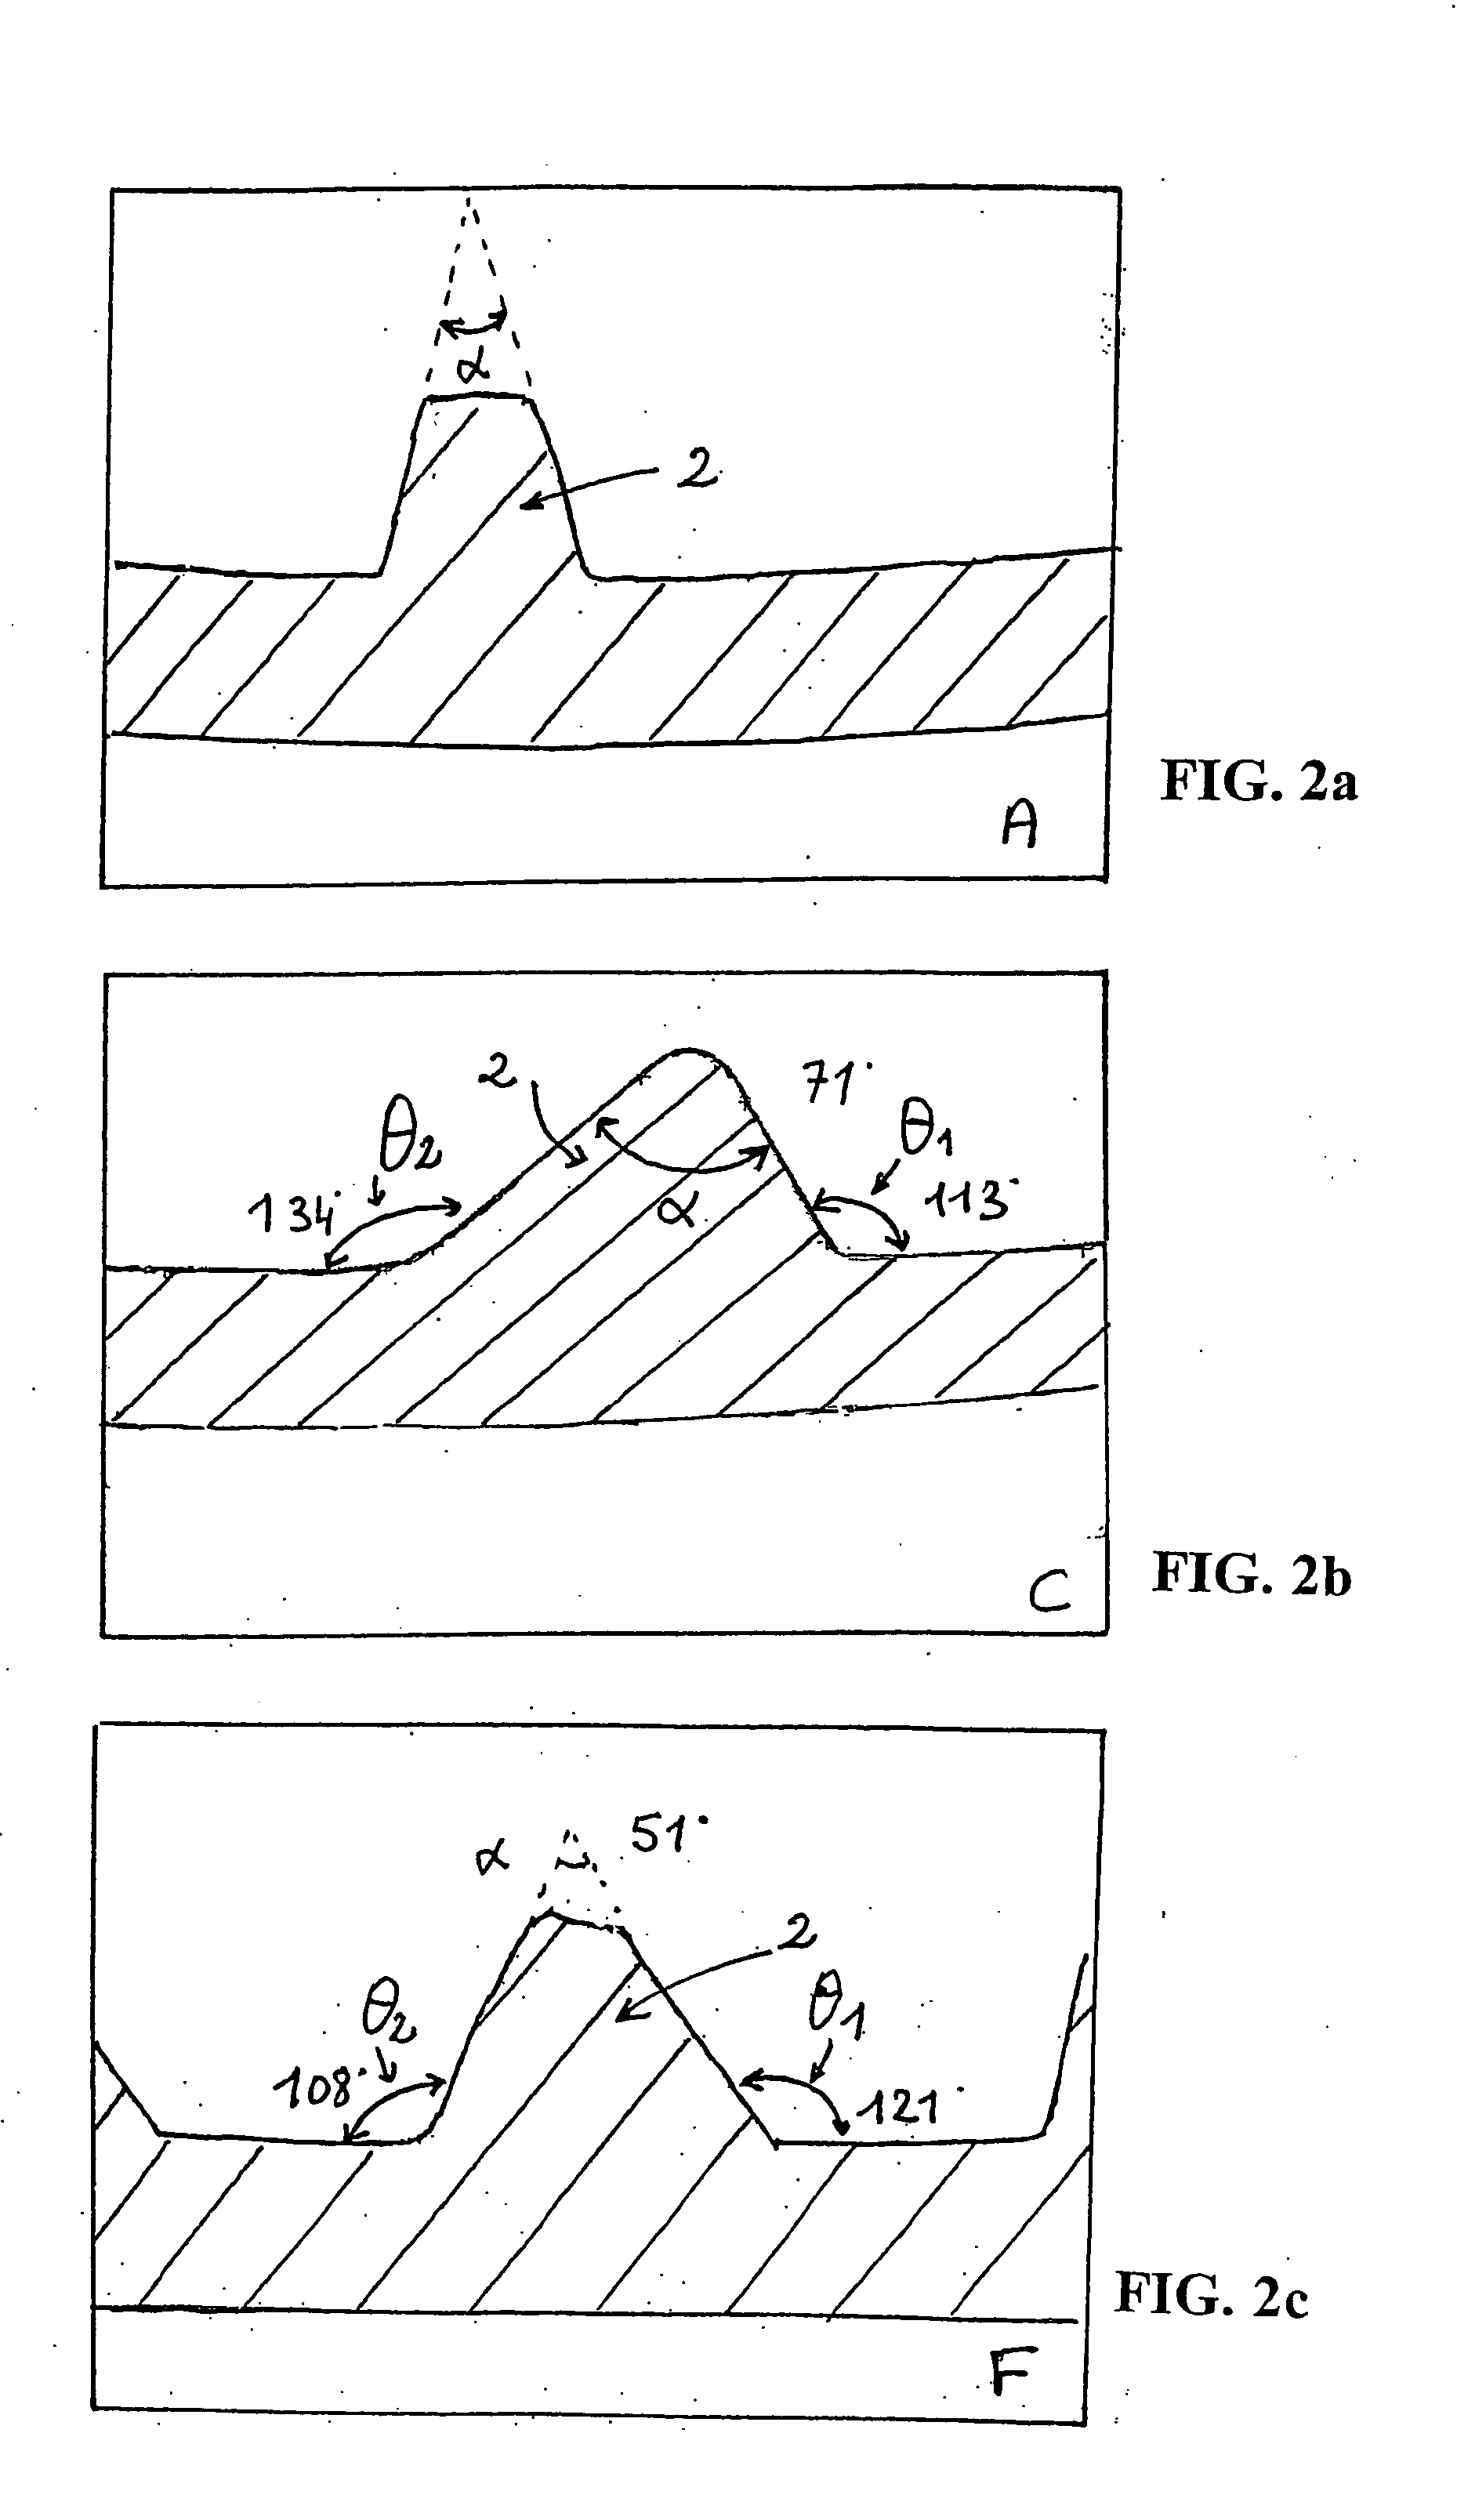 Grooved tubes for heat exchangers that use a single-phase fluid